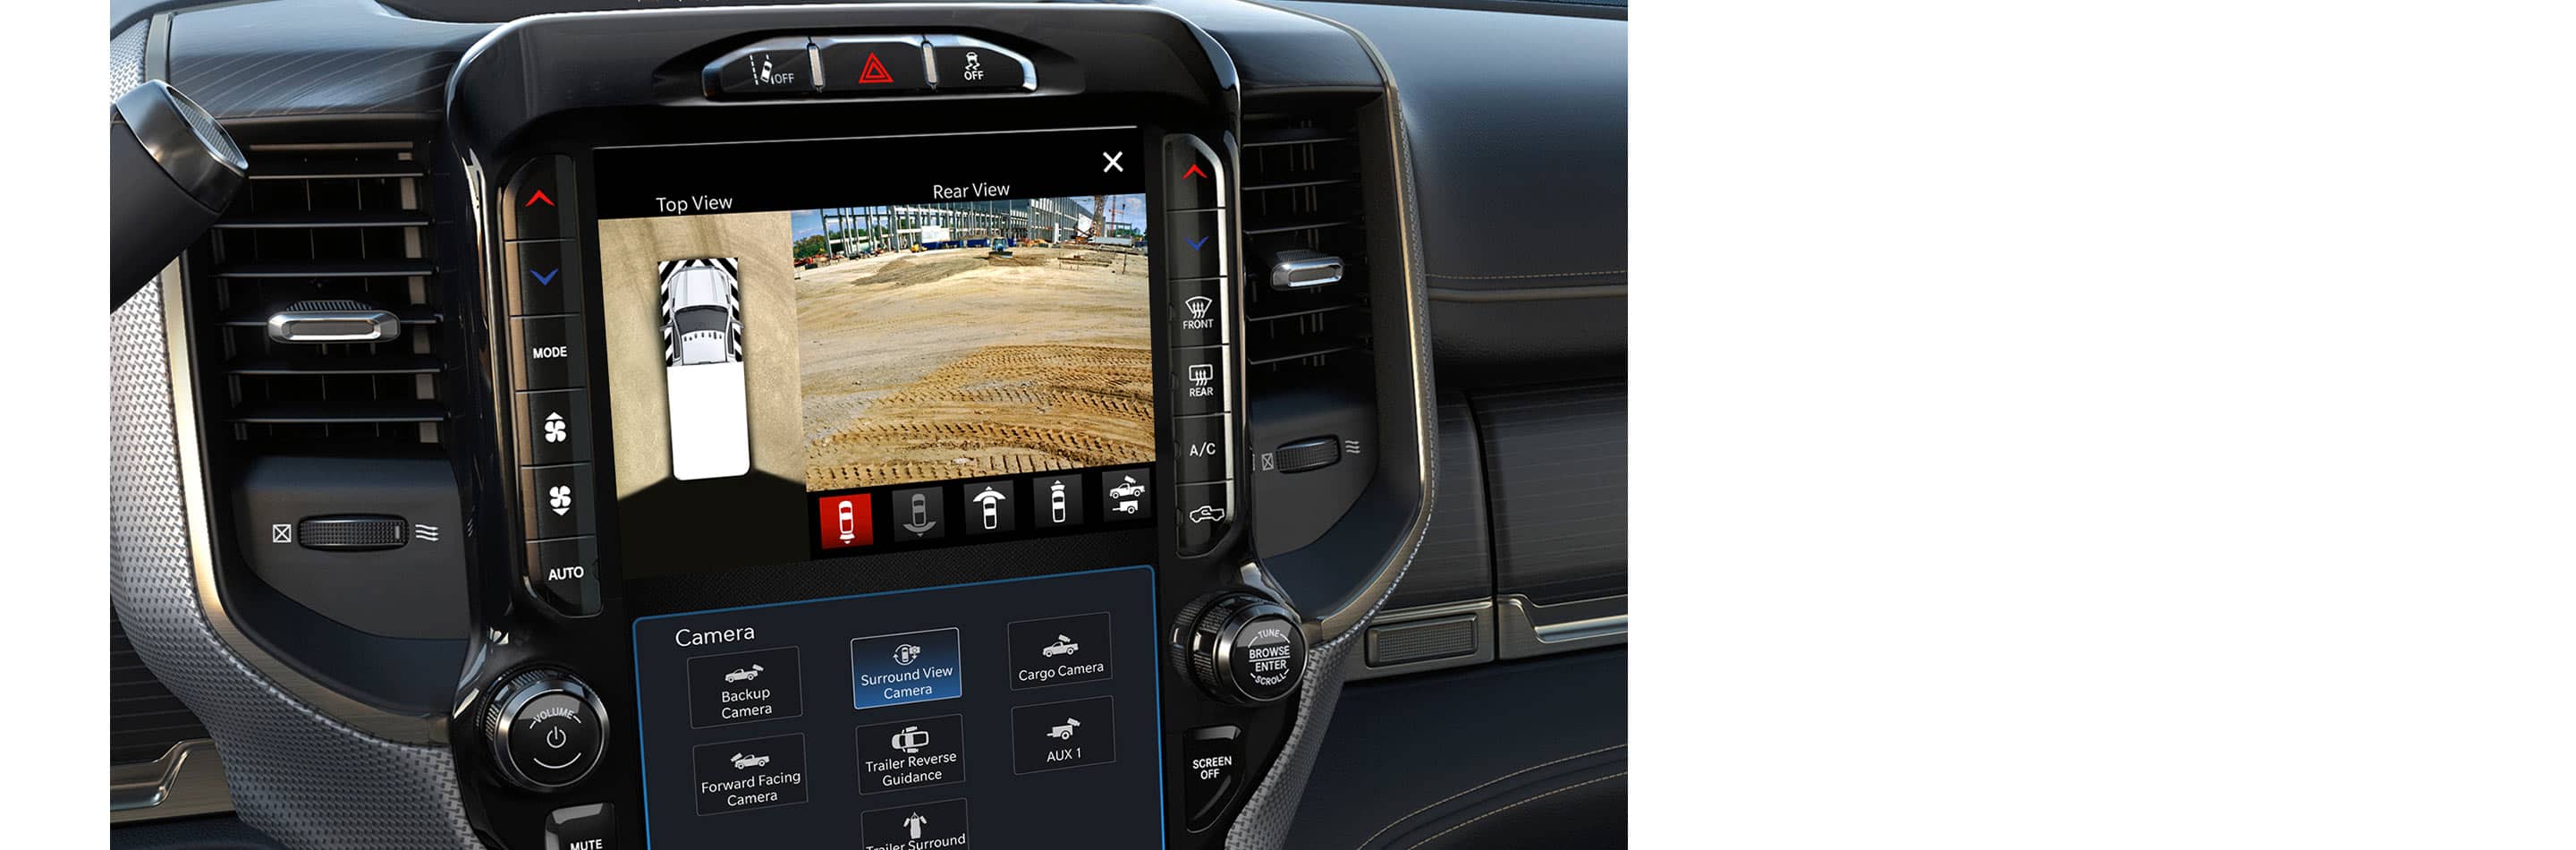 The interior of the 2023 Ram Chassis Cab focusing on the Uconnect touchscreen displaying the output of the surround view camera.